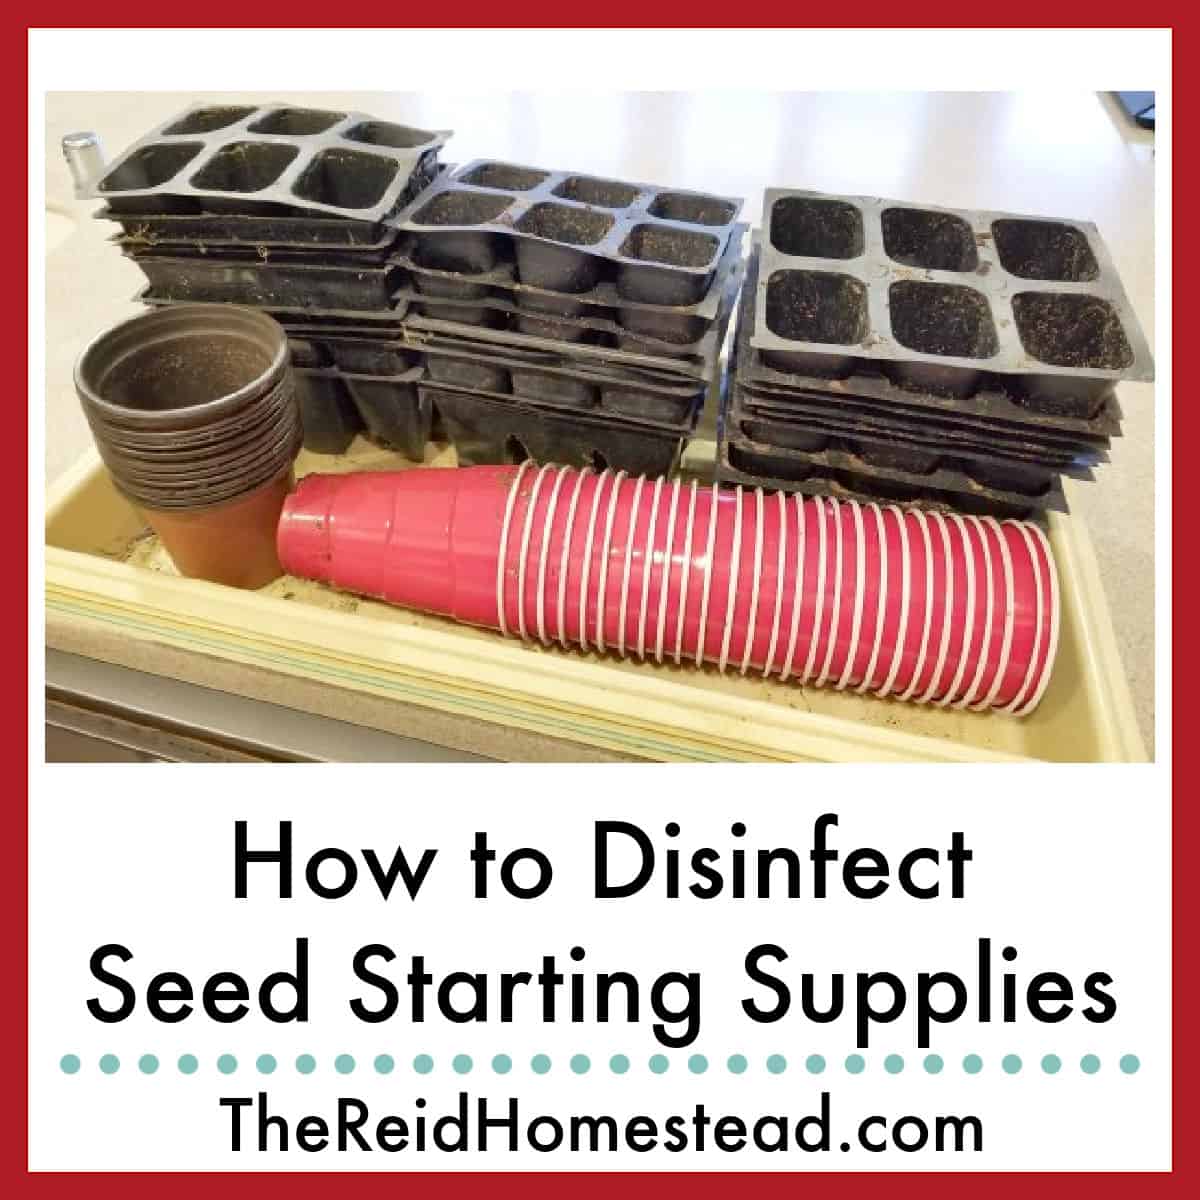 dirty plant trays and seed starting pots and 6-packs, text overlay How to Disinfect Seed Starting Supplies